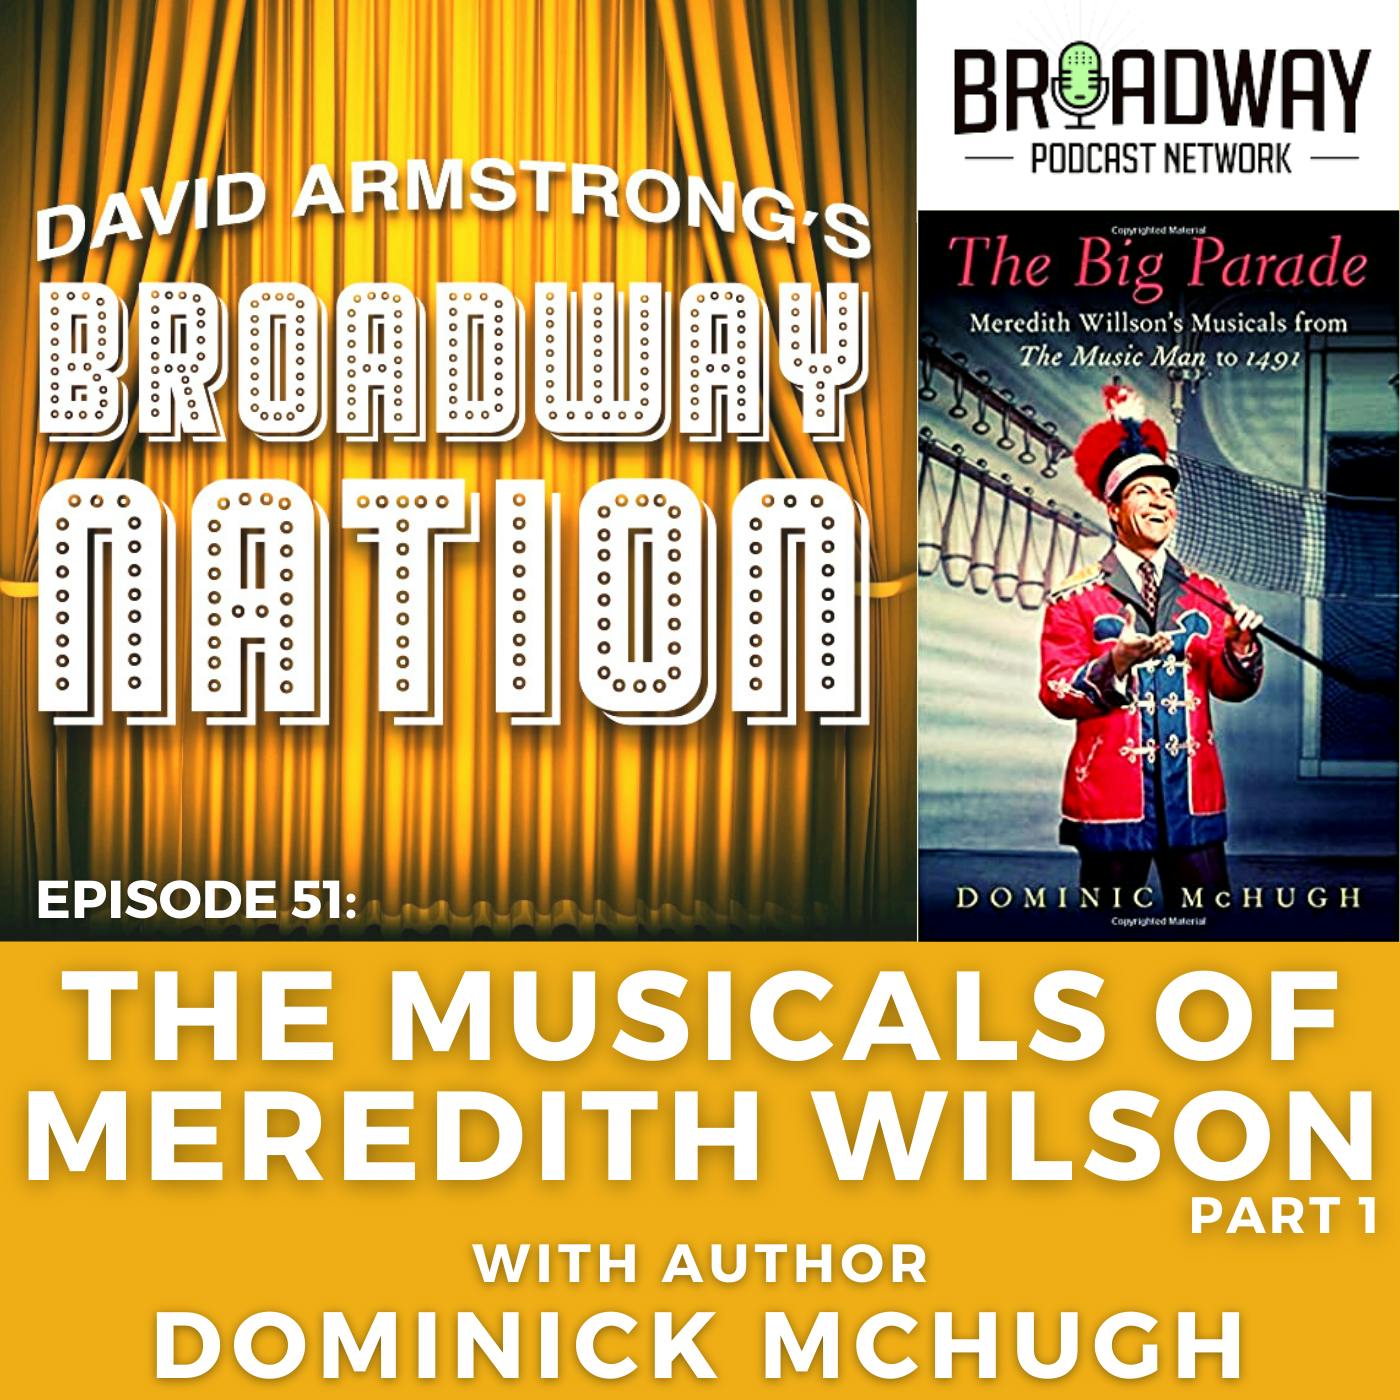 Episode 51: The Musicals of Meredith Wilson, Part 1 Image